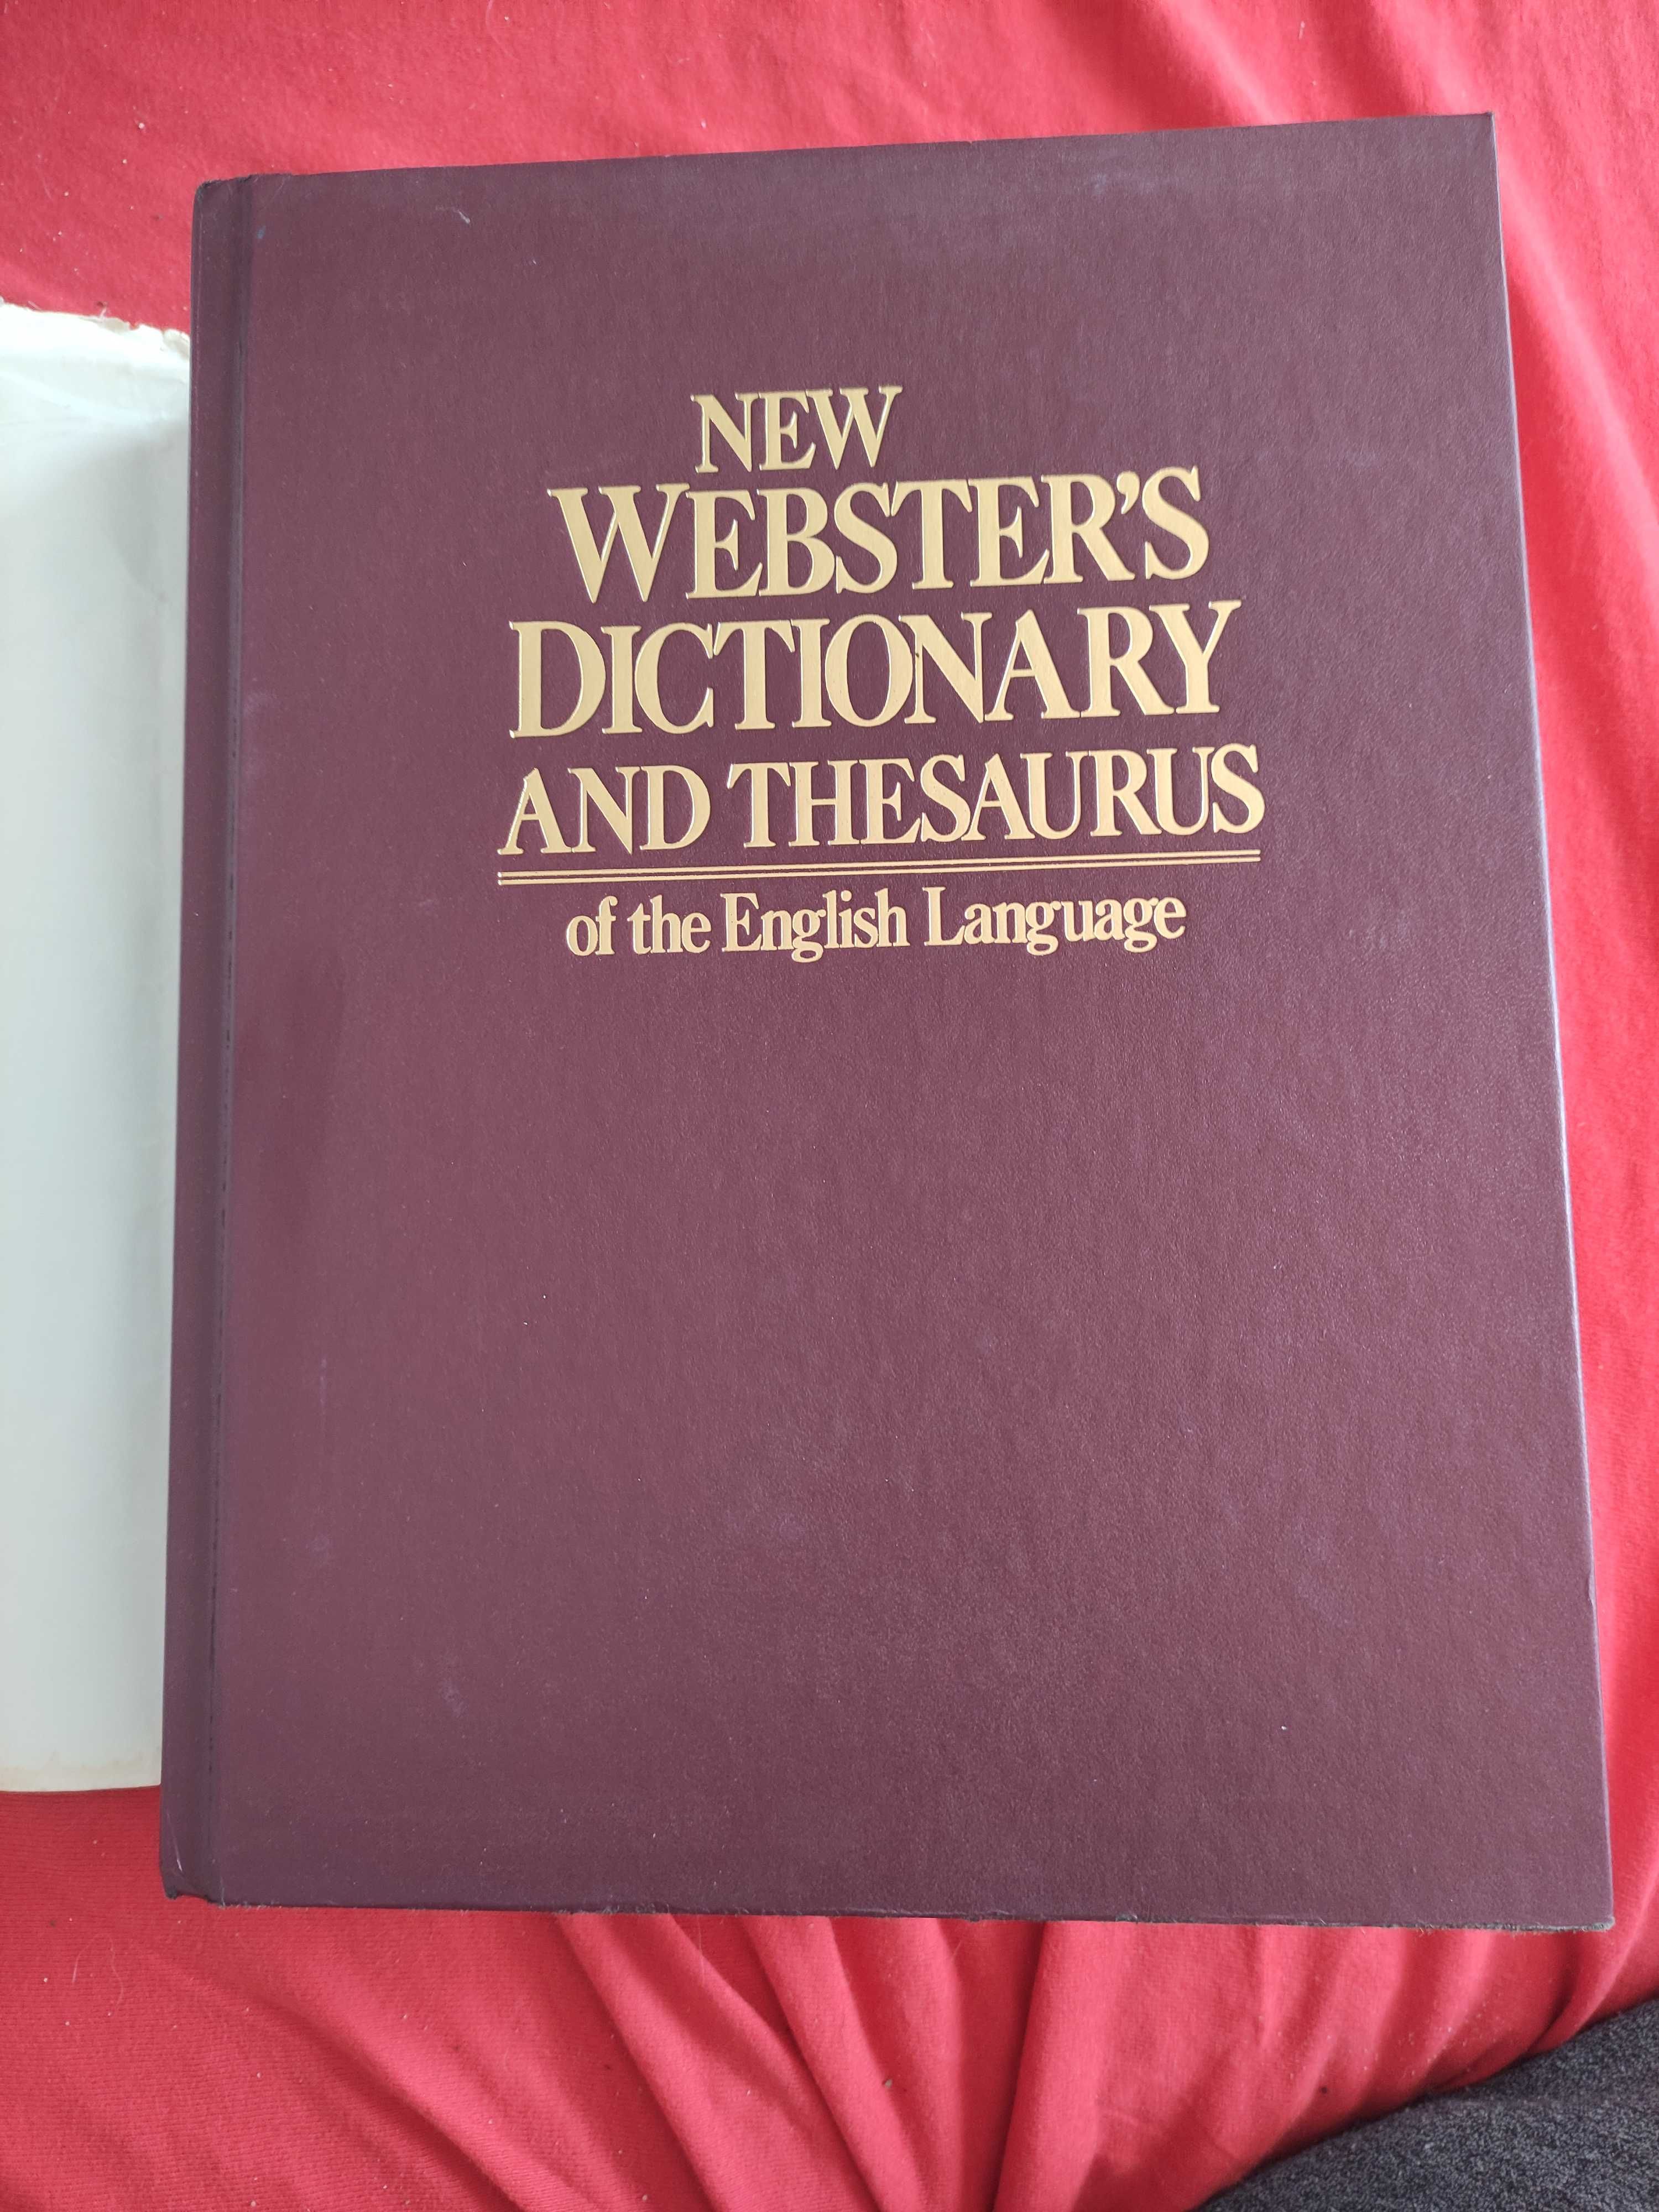 New webster's dictionary and thesaurus of the english language